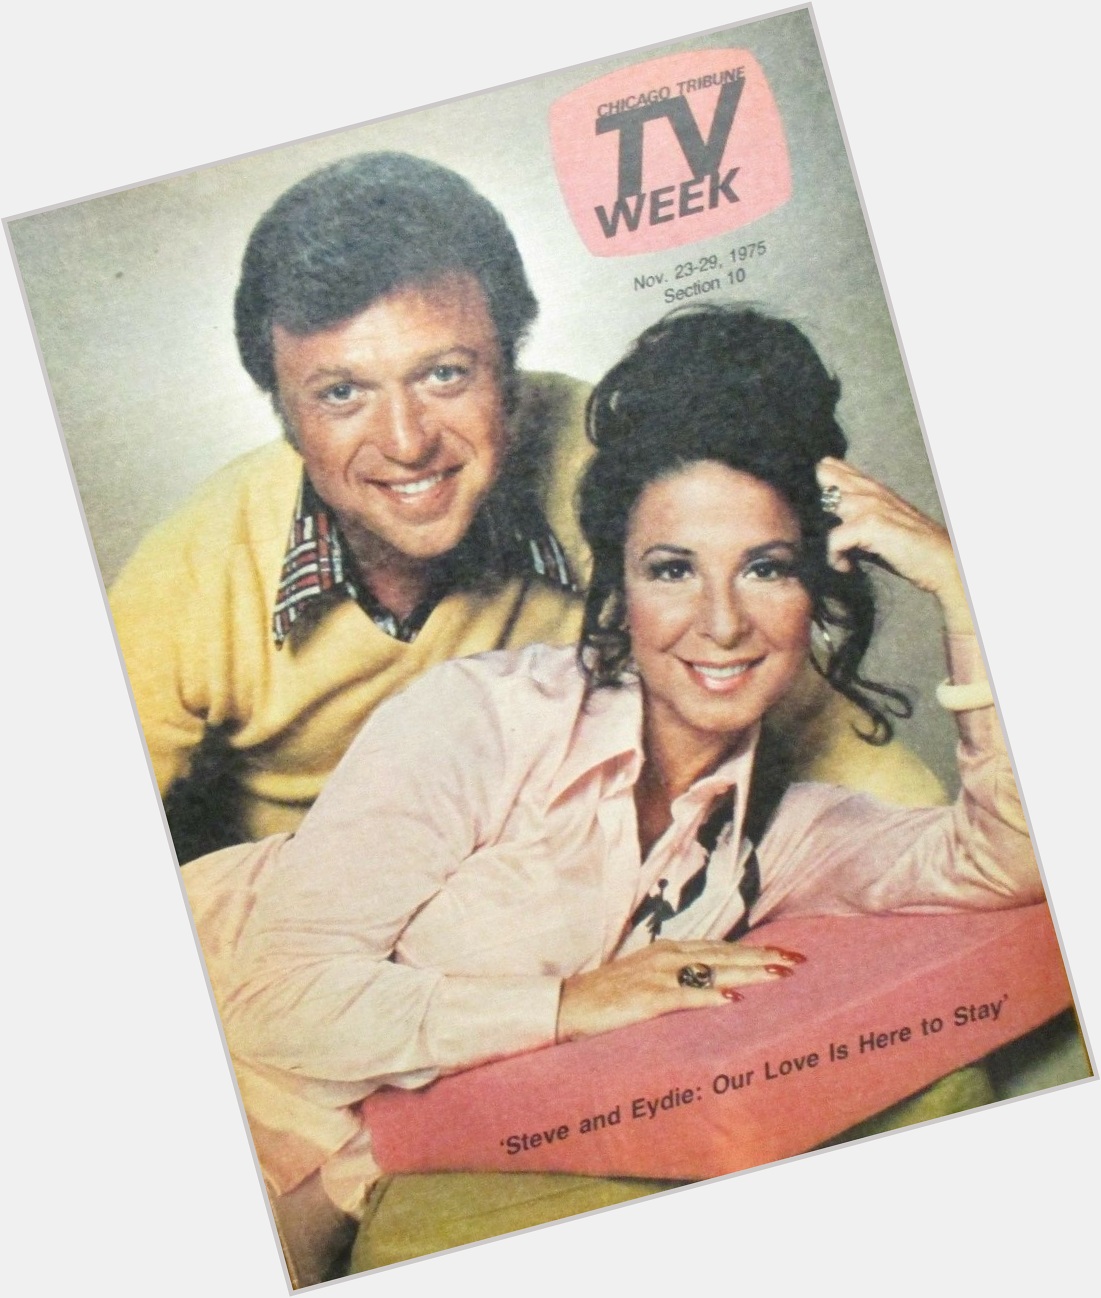 Happy Birthday to Steve Lawrence, born on this day in 1935.
Chicago Tribune TV Week.  November 23-29, 1975 